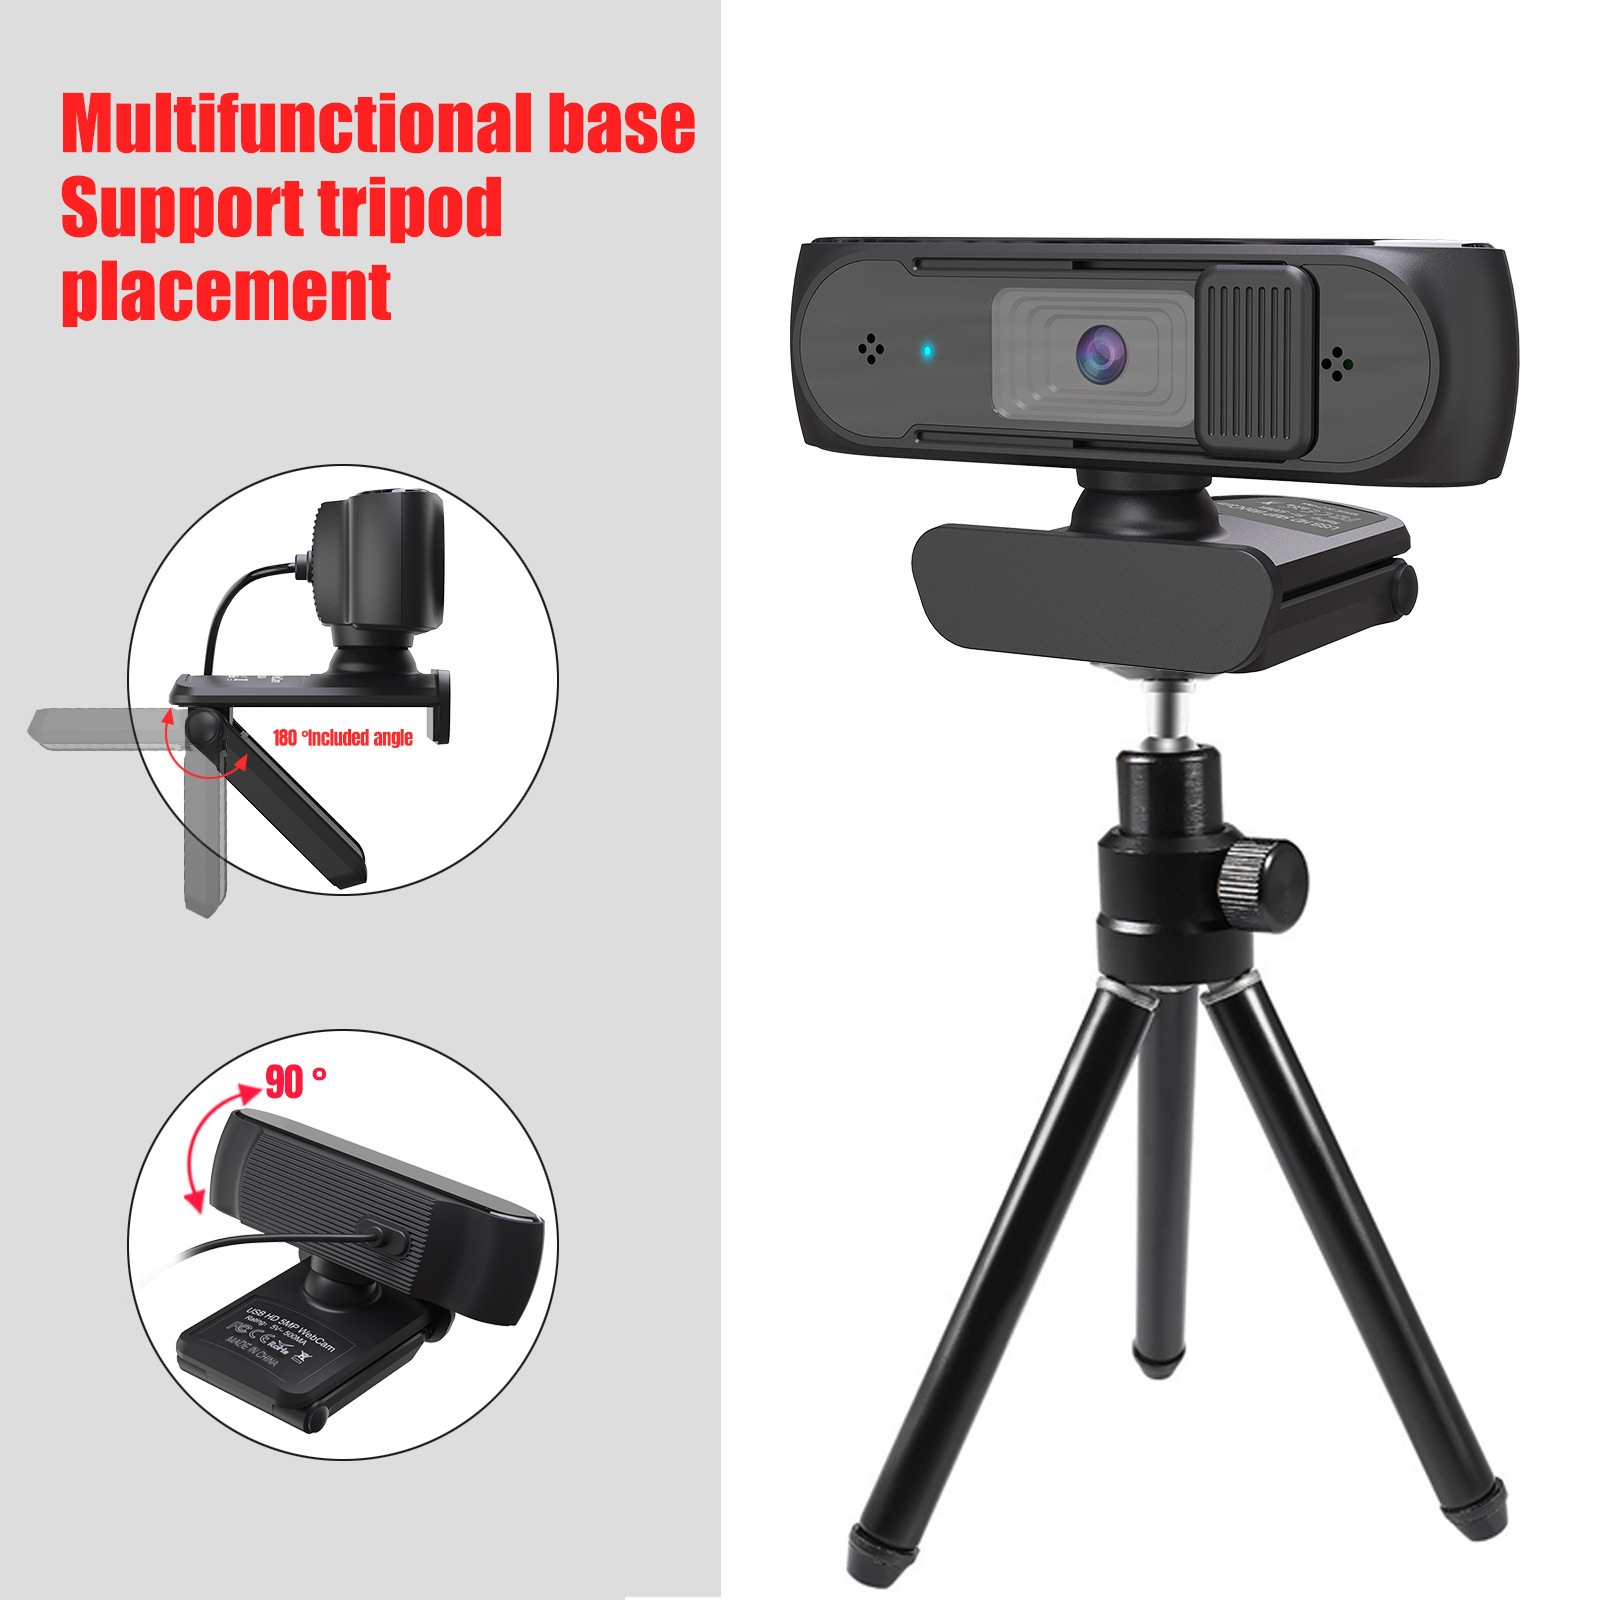 Haokai-K30-HD-5MP-USB-Webcam-77deg-Wide-Angle-Auto-Focus-Built-in-Dual-Mics-with-Privacy-Cover-Smart-1828697-8